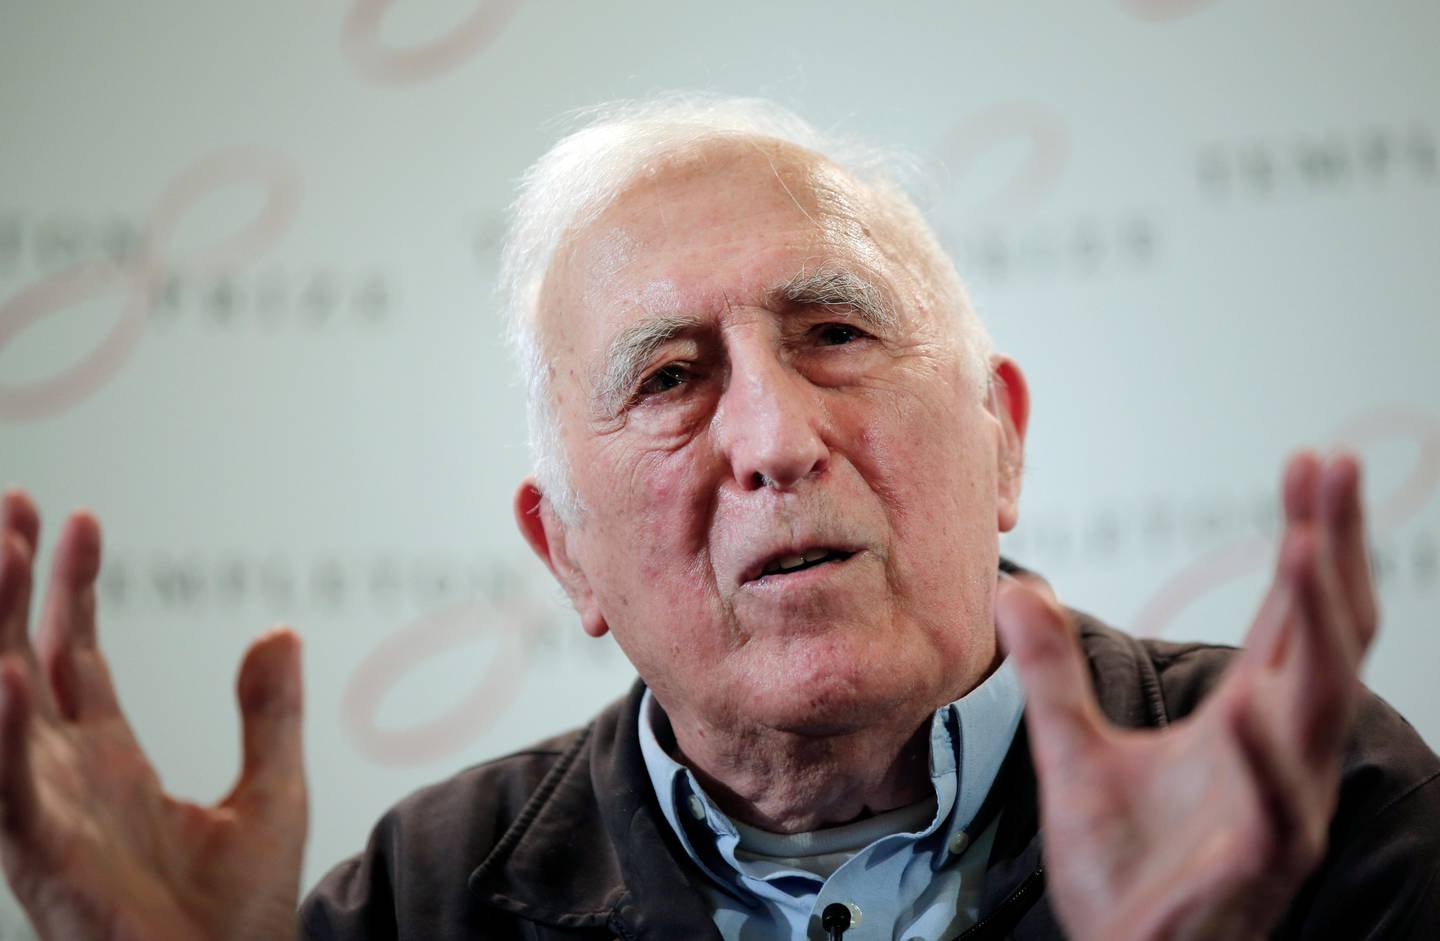 FILE - In this file photo dated Wednesday, March 11, 2015, showing Jean Vanier, the founder of L'ARCHE, an international network of communities where people with and without intellectual disabilities live and work together, in central London.  An internal report revealed Saturday Feb. 22, 2020, that LArche founder Jean Vanier, a respected Canadian religious figure, sexually abused at least six women.  (AP Photo/Lefteris Pitarakis, FILE)